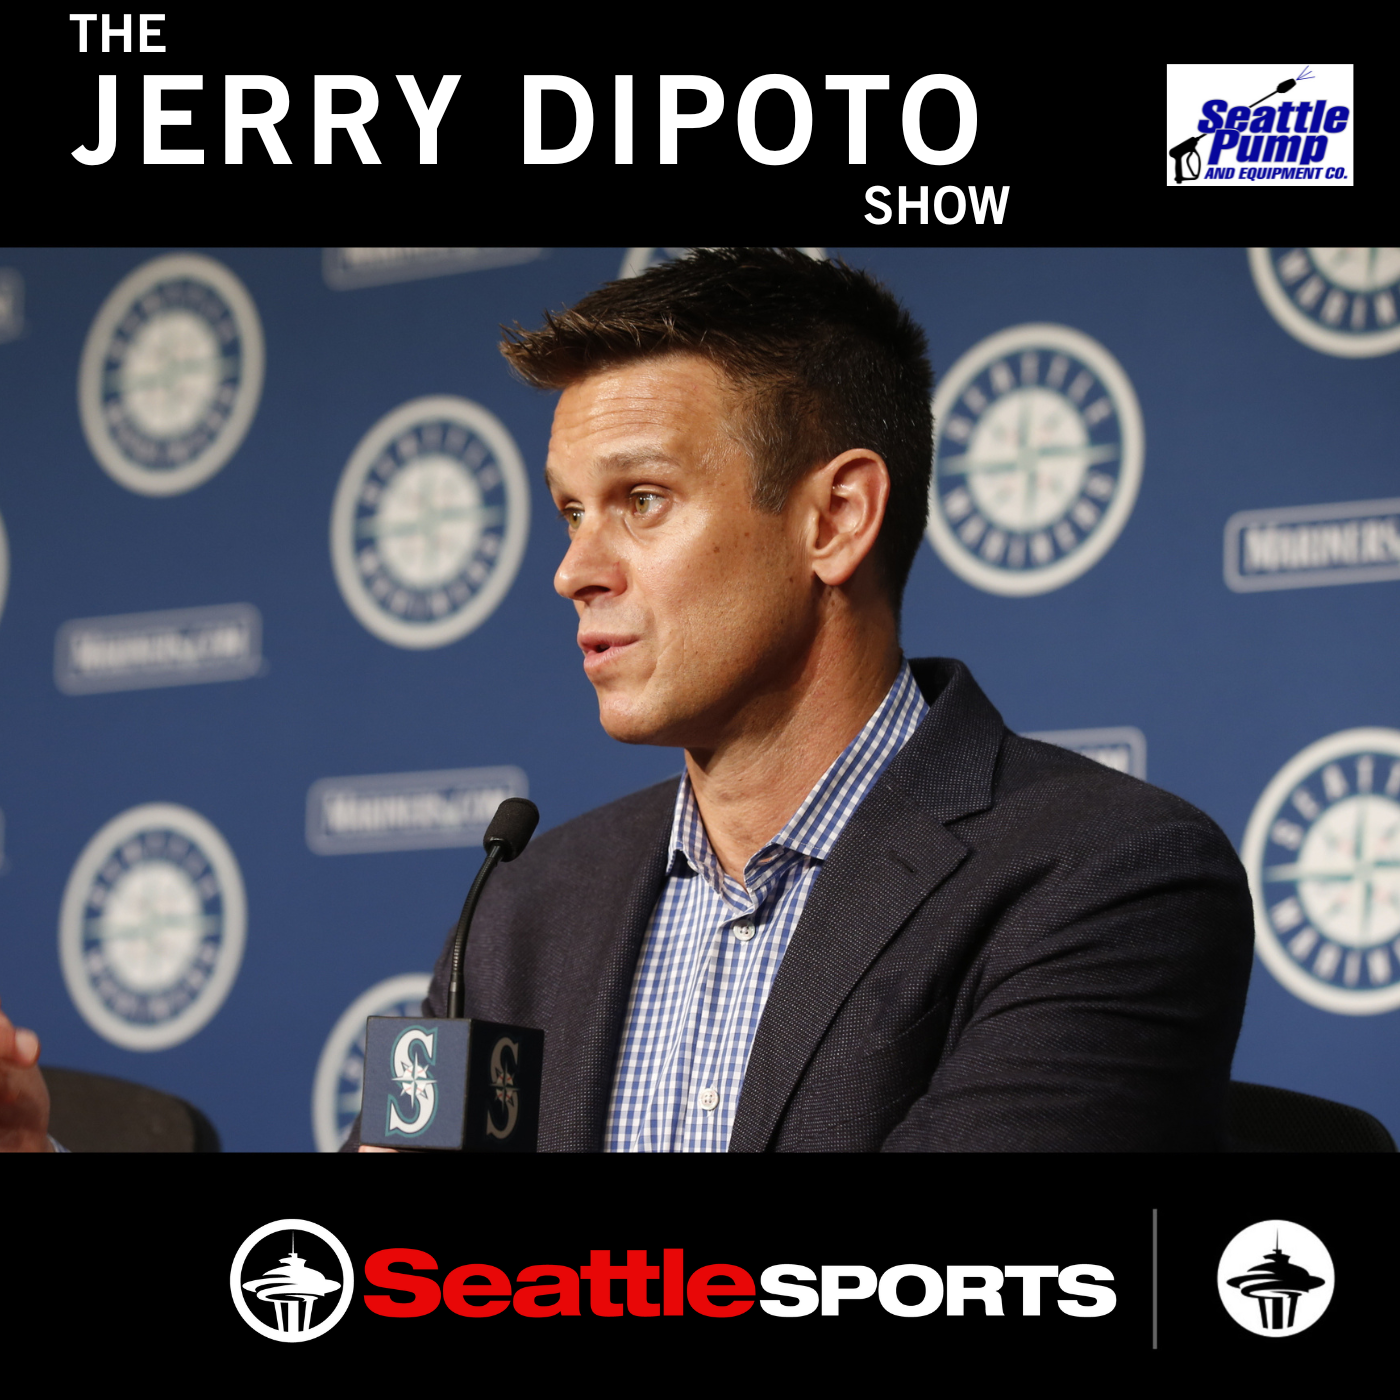 Jerry Dipoto-On 21 wins in August